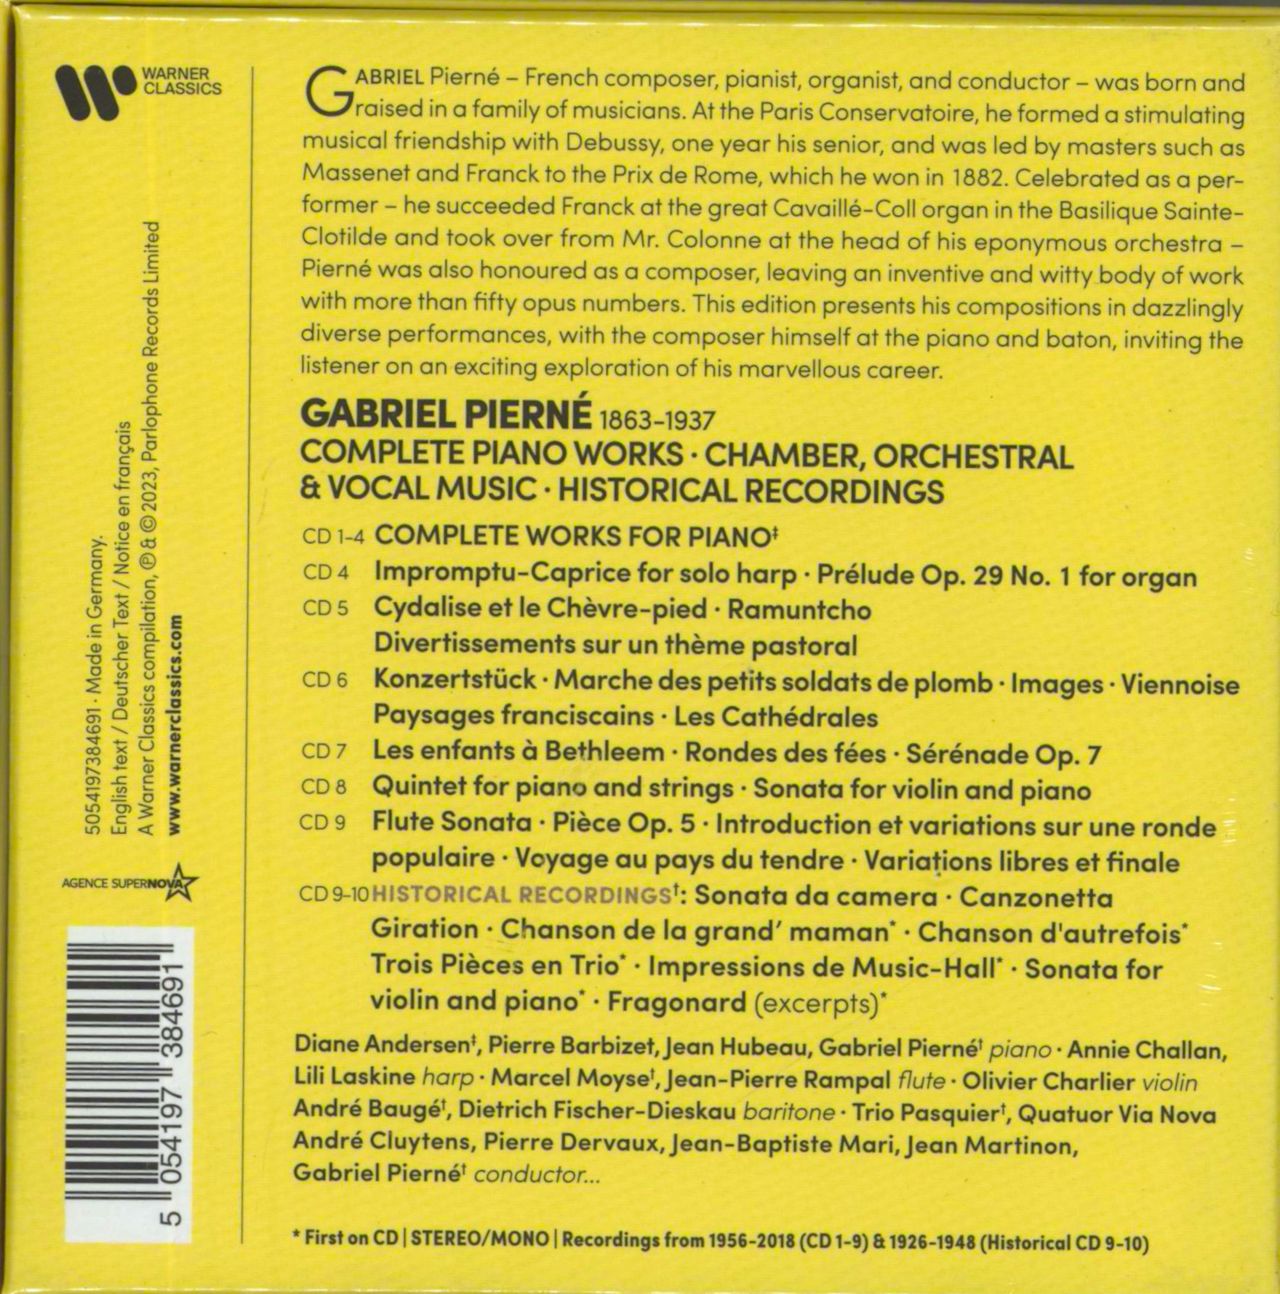 Gabriel Pierne Complete Piano Works, Chamber Orchestral & Vocal